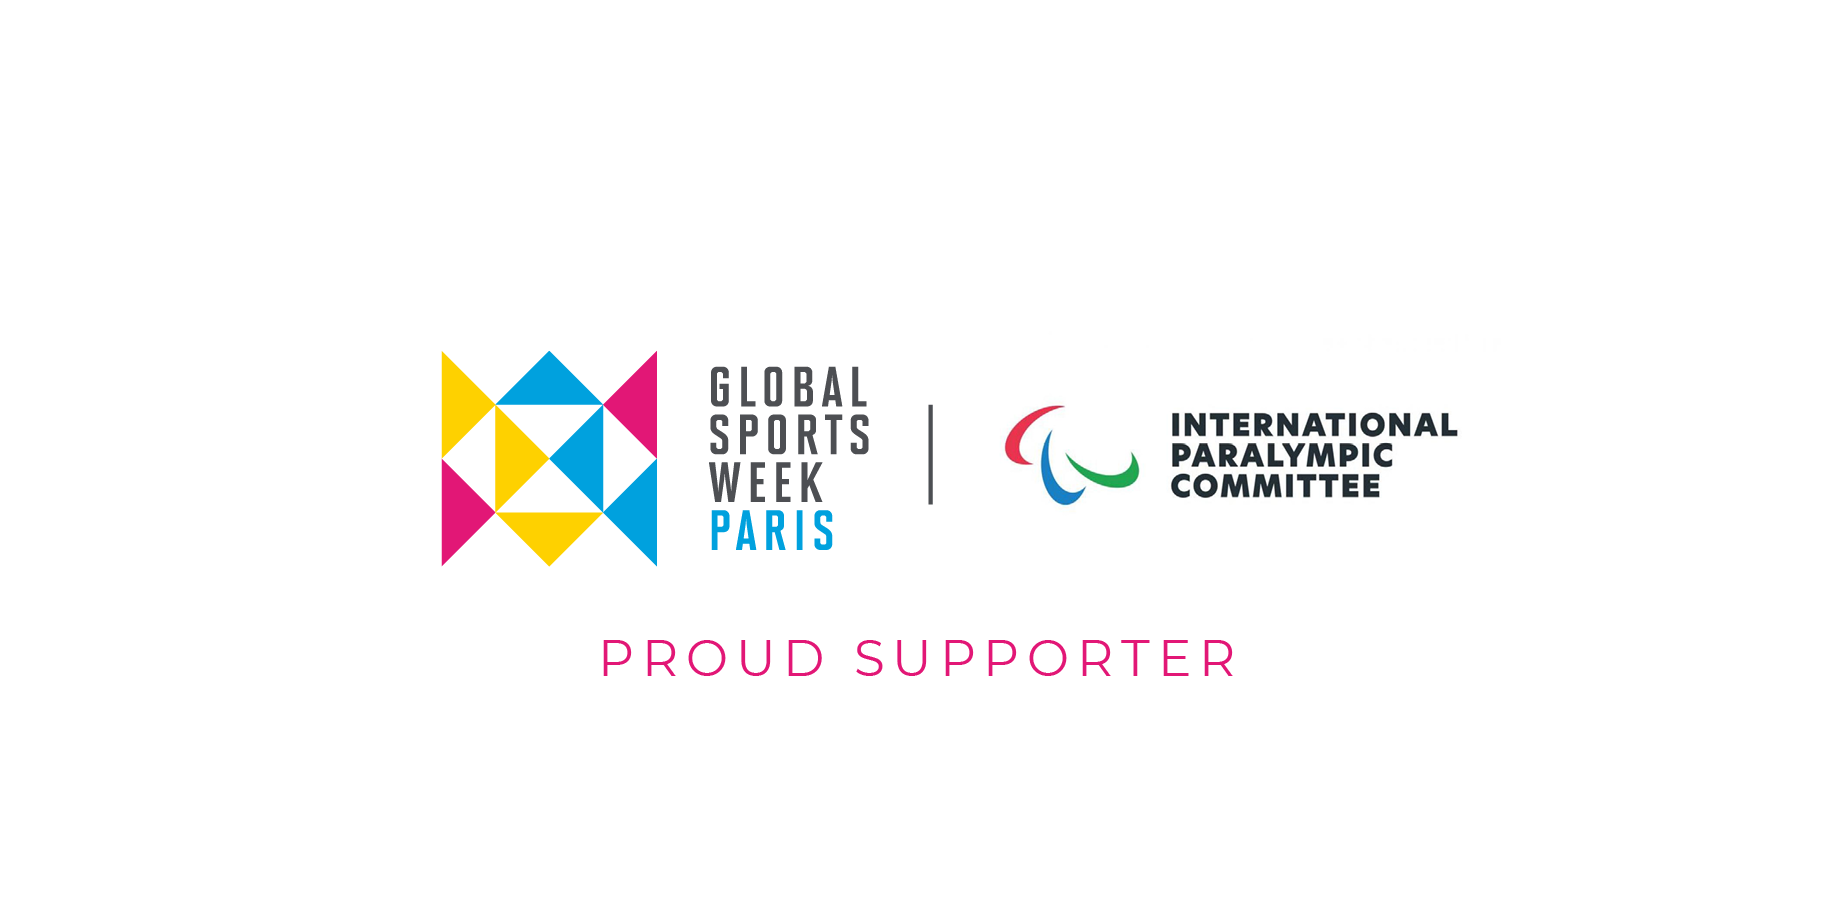 IPC is a Proud Supporter of Global Sports Week Paris